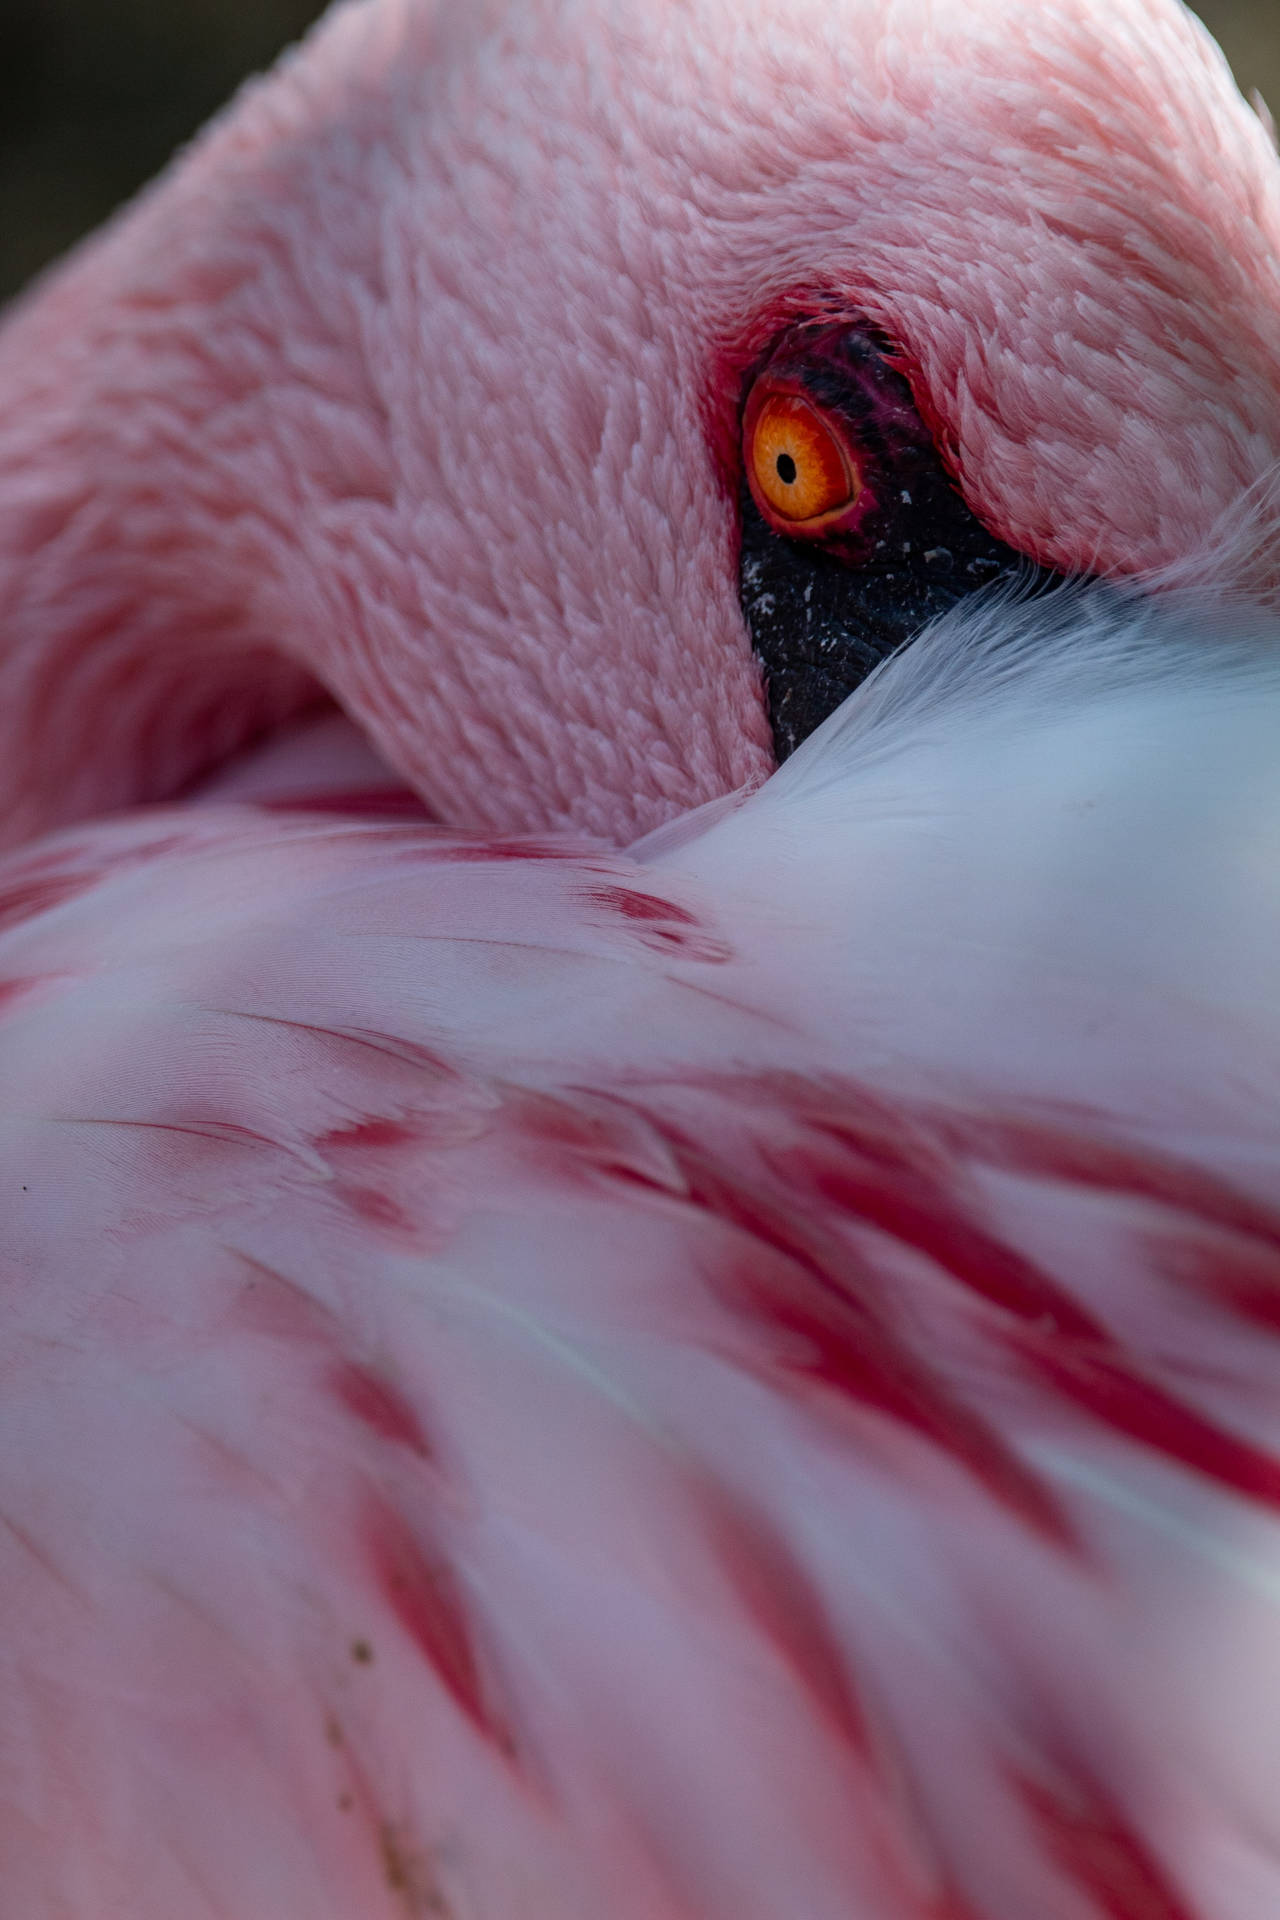 Flamingo 2333X3500 Wallpaper and Background Image